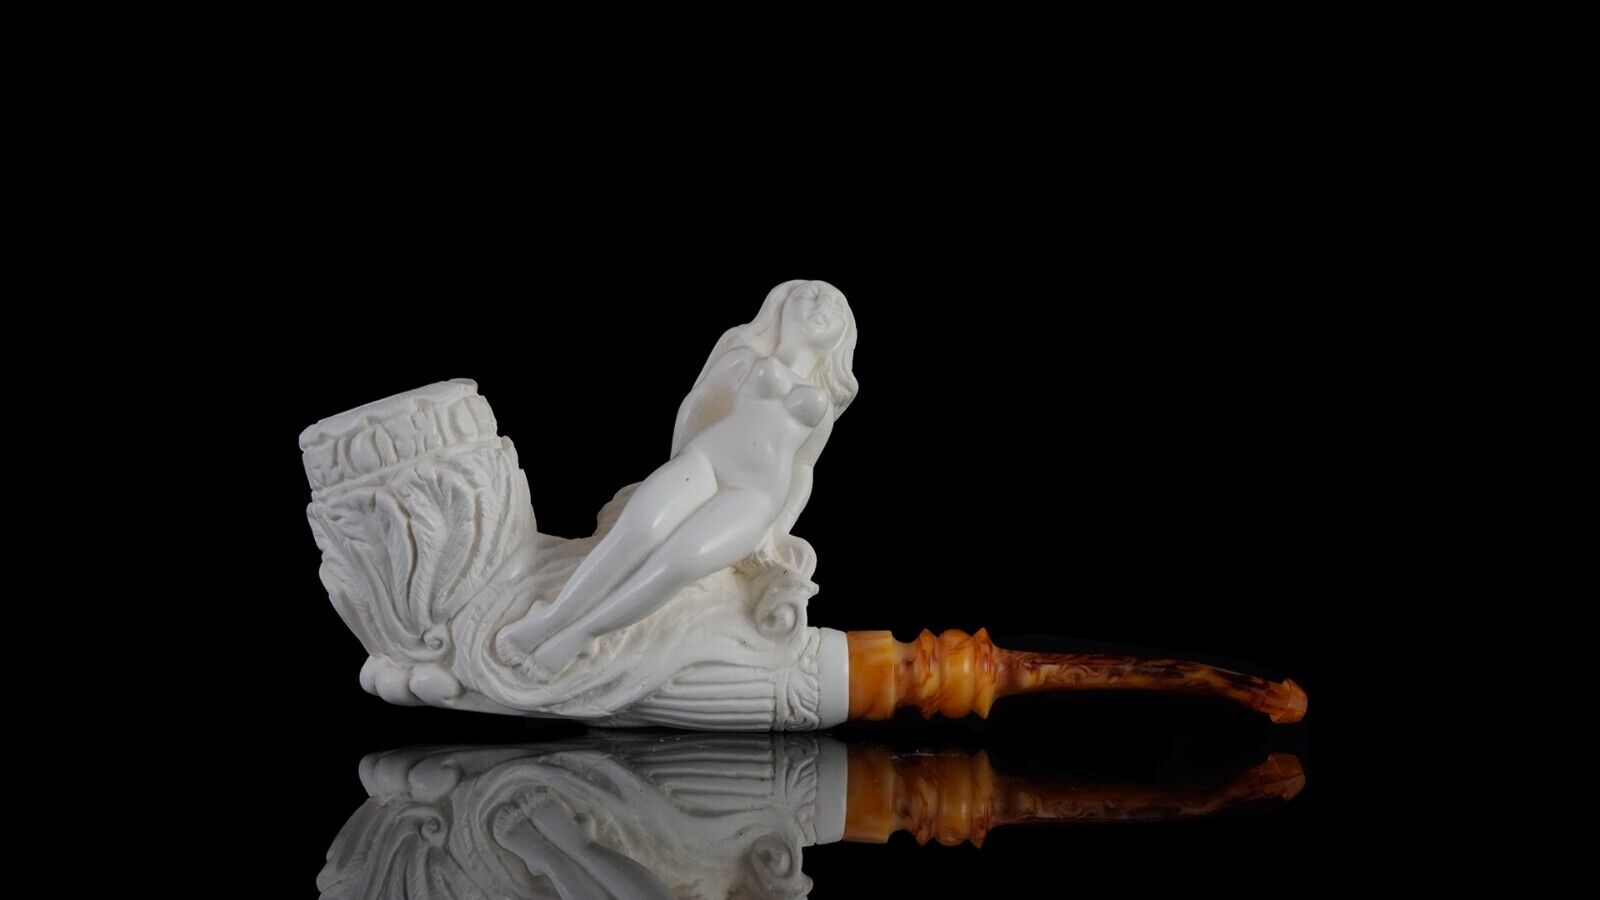 Large Naked Lady Meerschaum Pipe handmade smoking tobacco w case MD-194